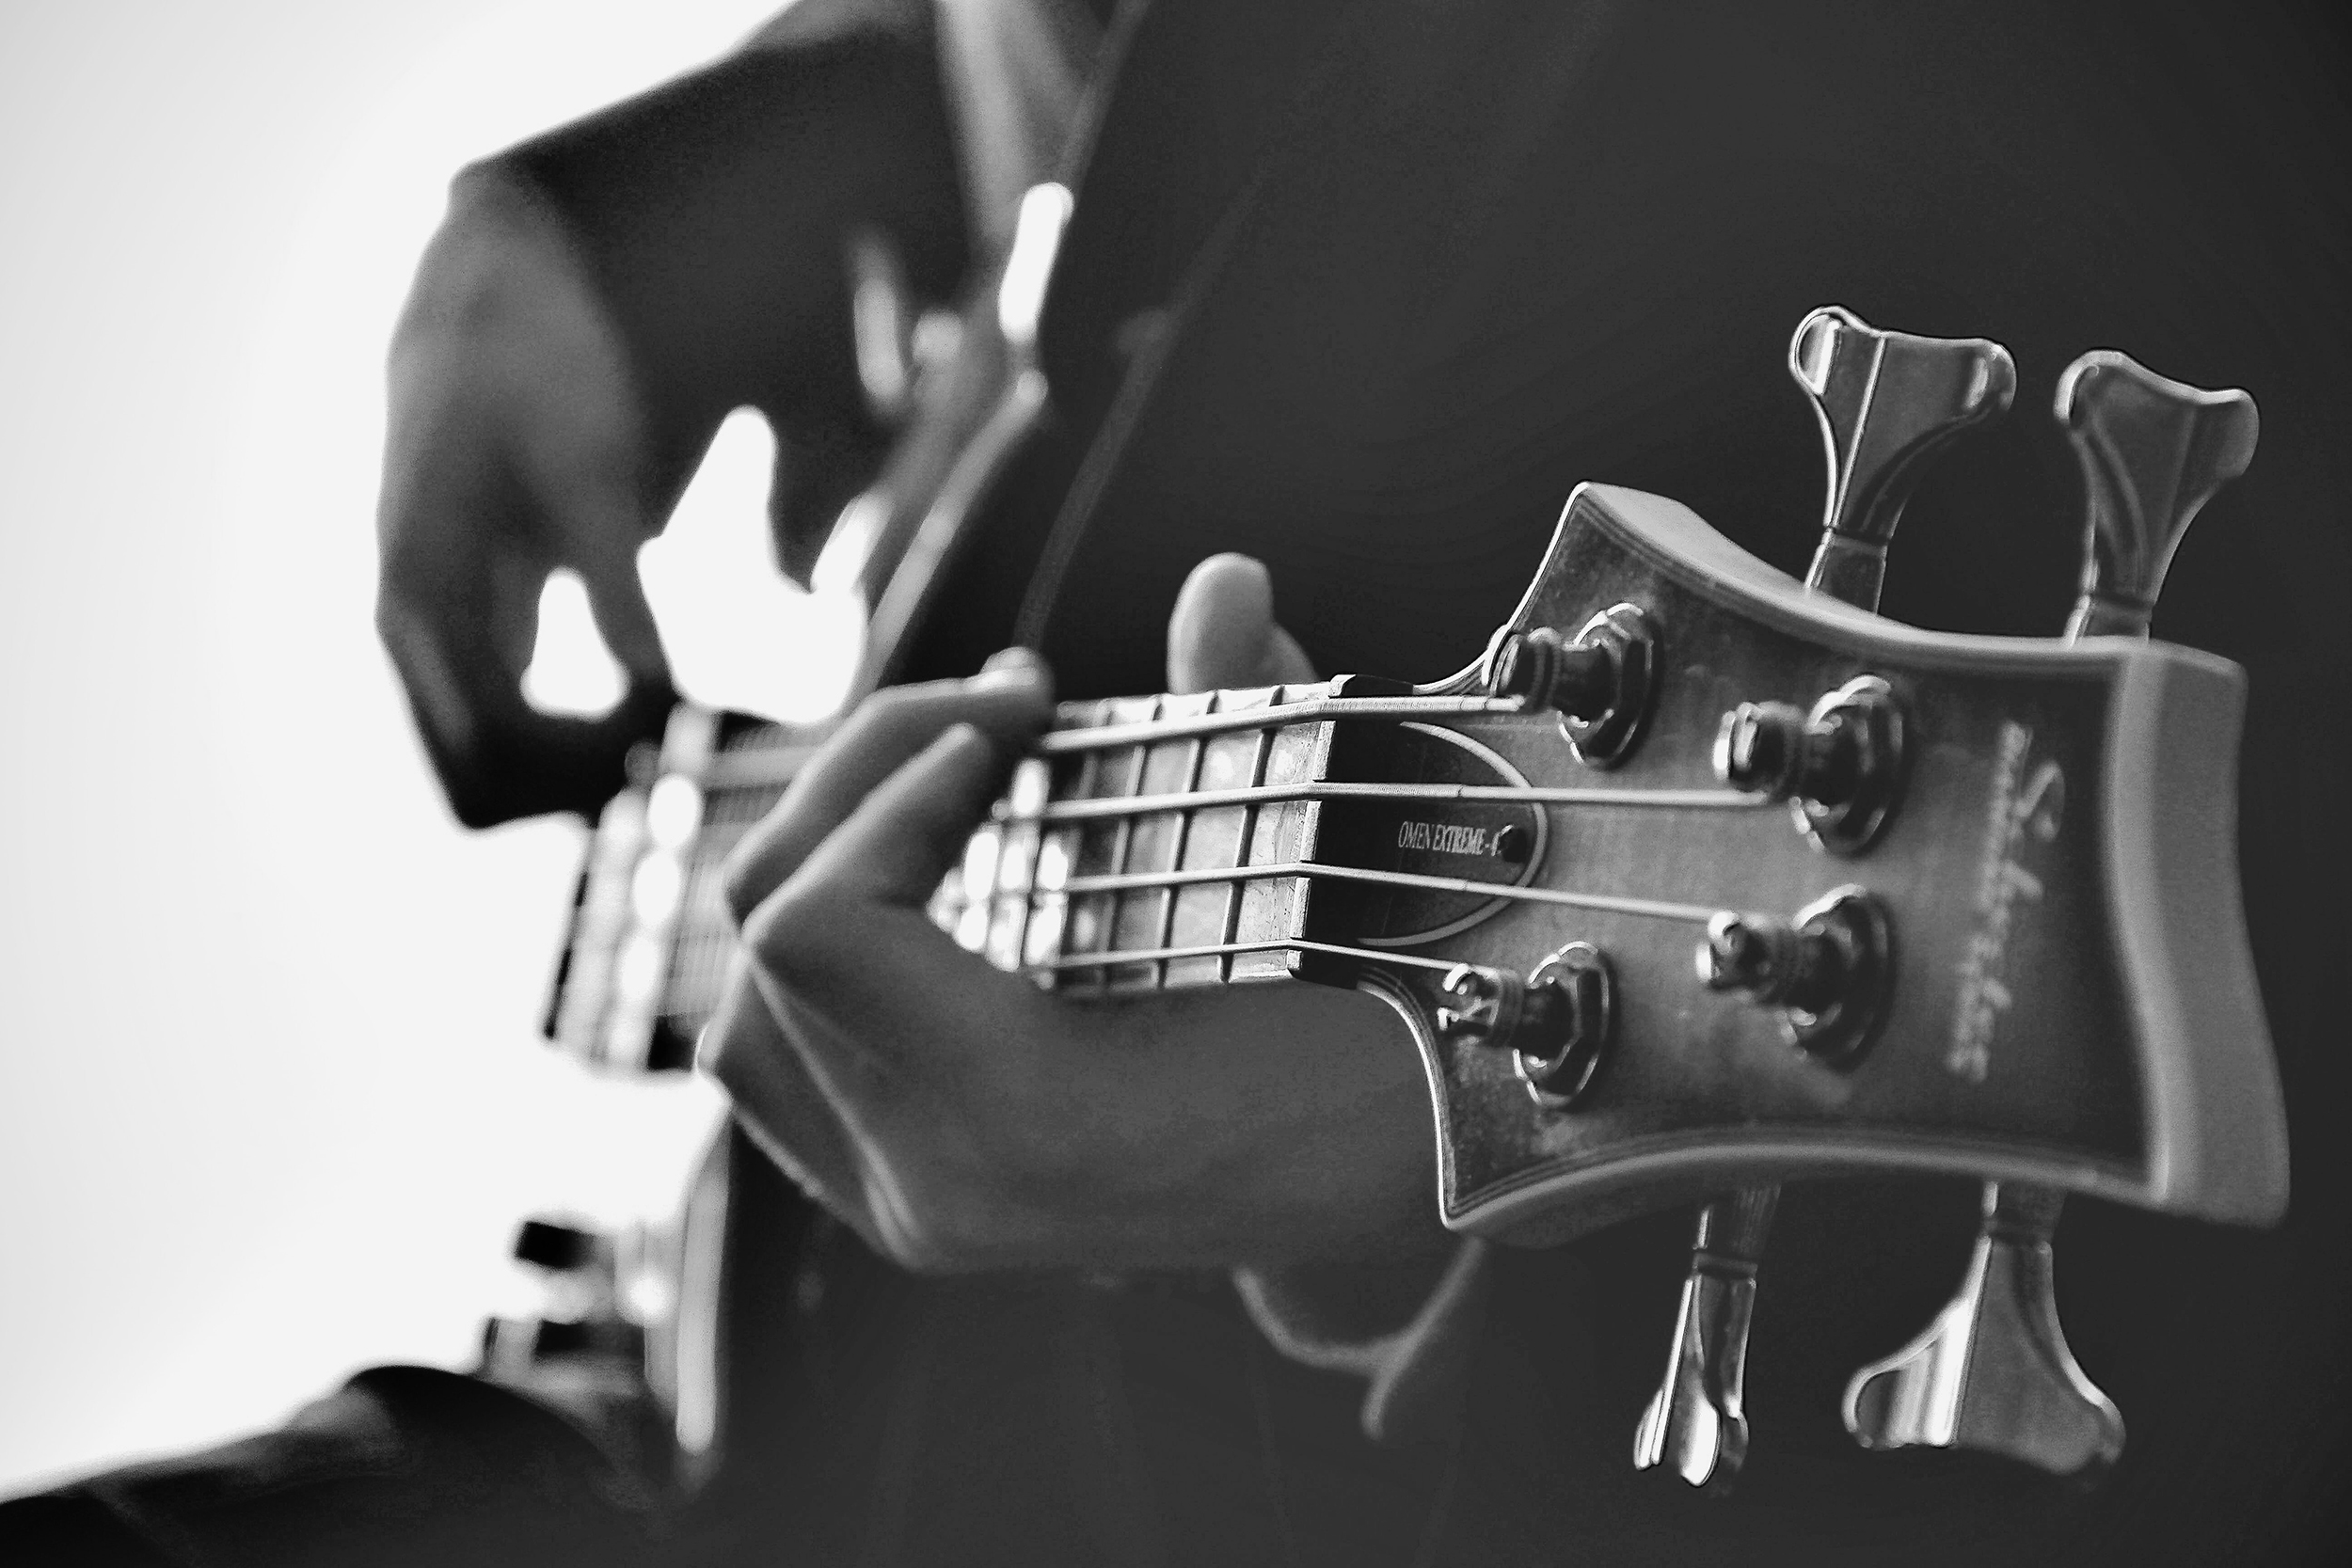 A black and white photo of a person in a suit playing a guitar, showing their hands on the strings and frets. 